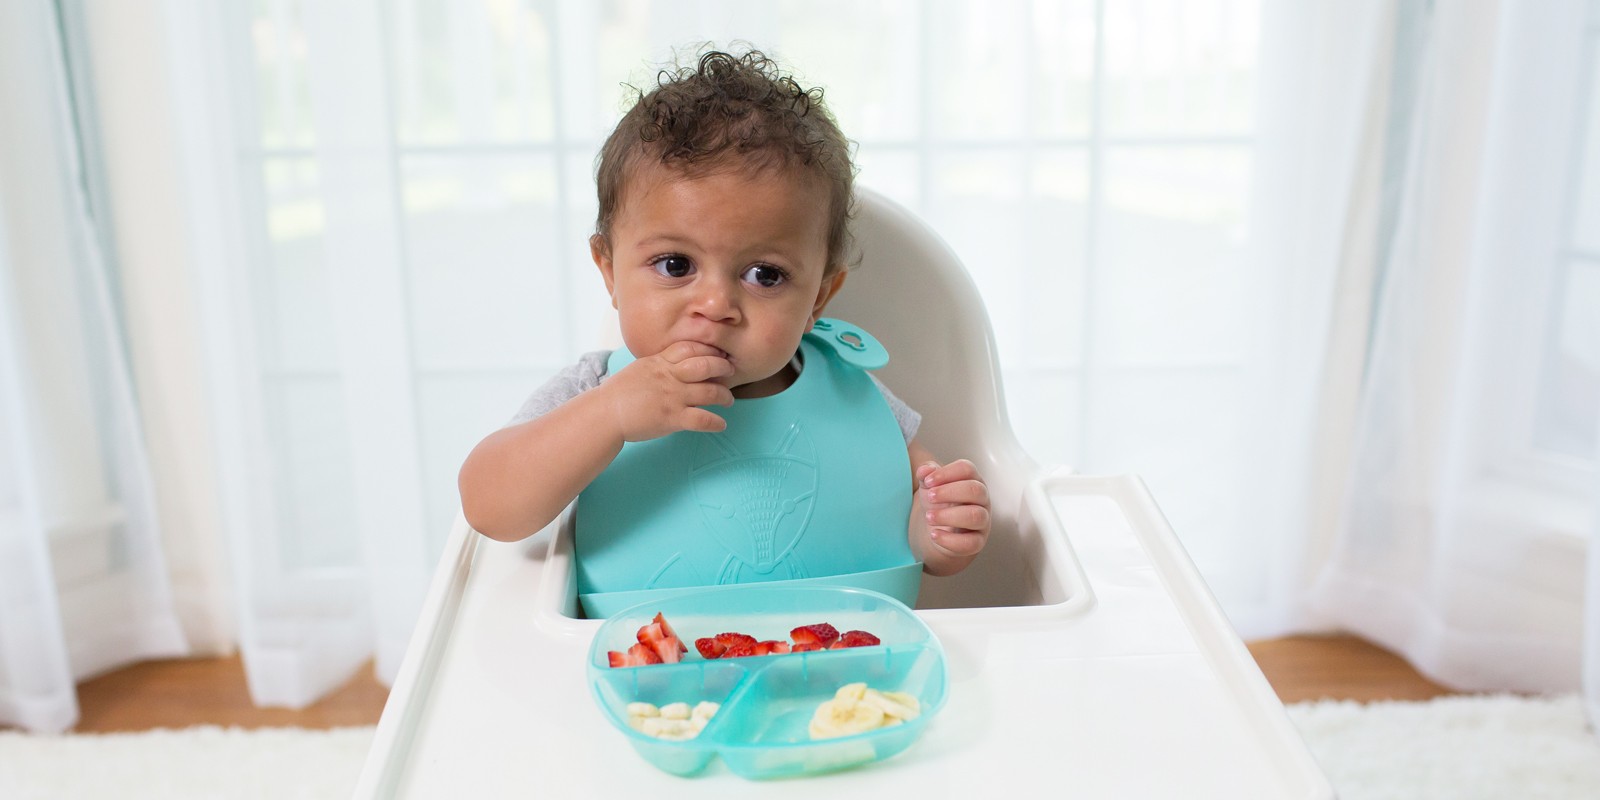 https://www.drbrownsbaby.com/wp-content/uploads/2021/02/Tips_to_Solve_Common_Eating_Issues_baby_eating.jpg